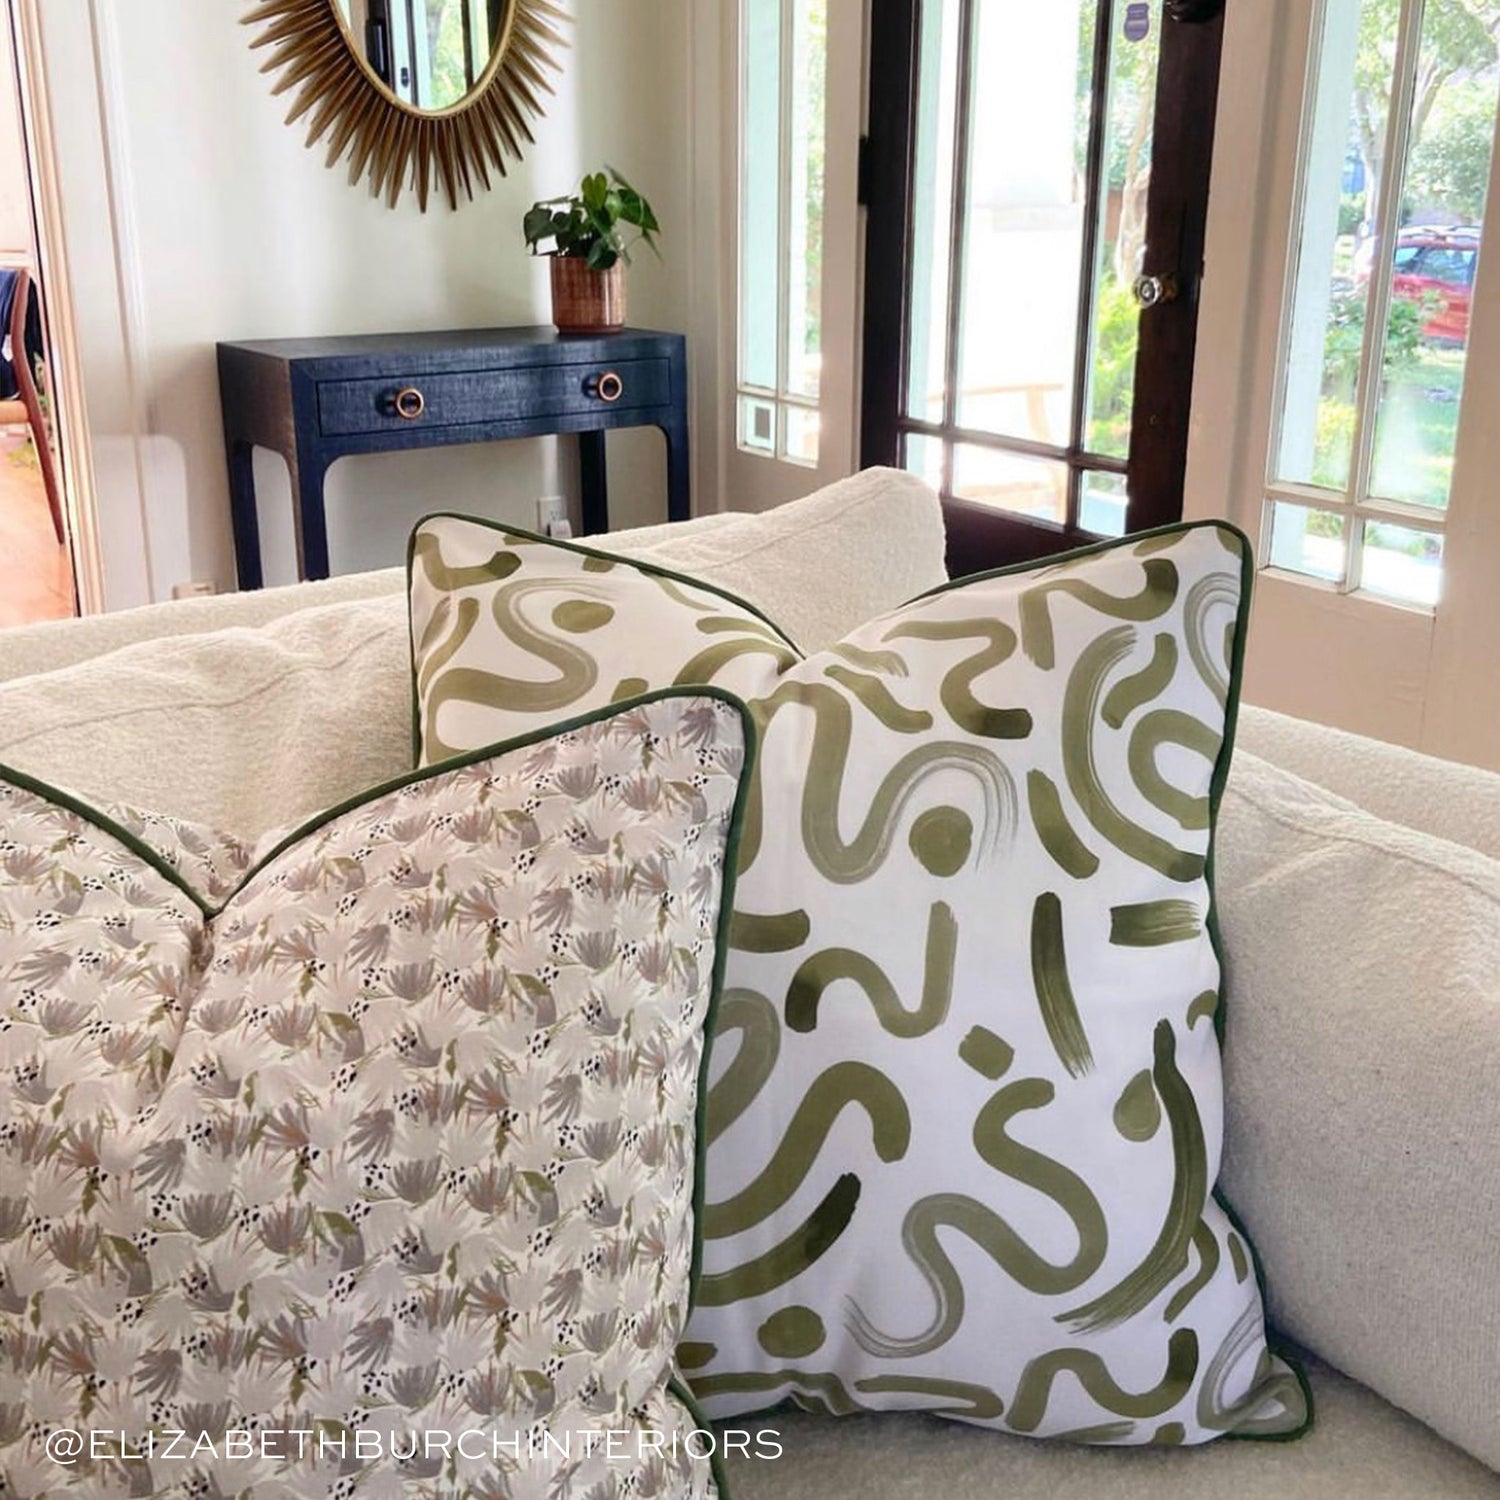 Living room styled with Grey Floral Printed Pillow and Moss Green Printed Pillow on cream couch near wooden front door. Photo taken by Elizabeth Burch